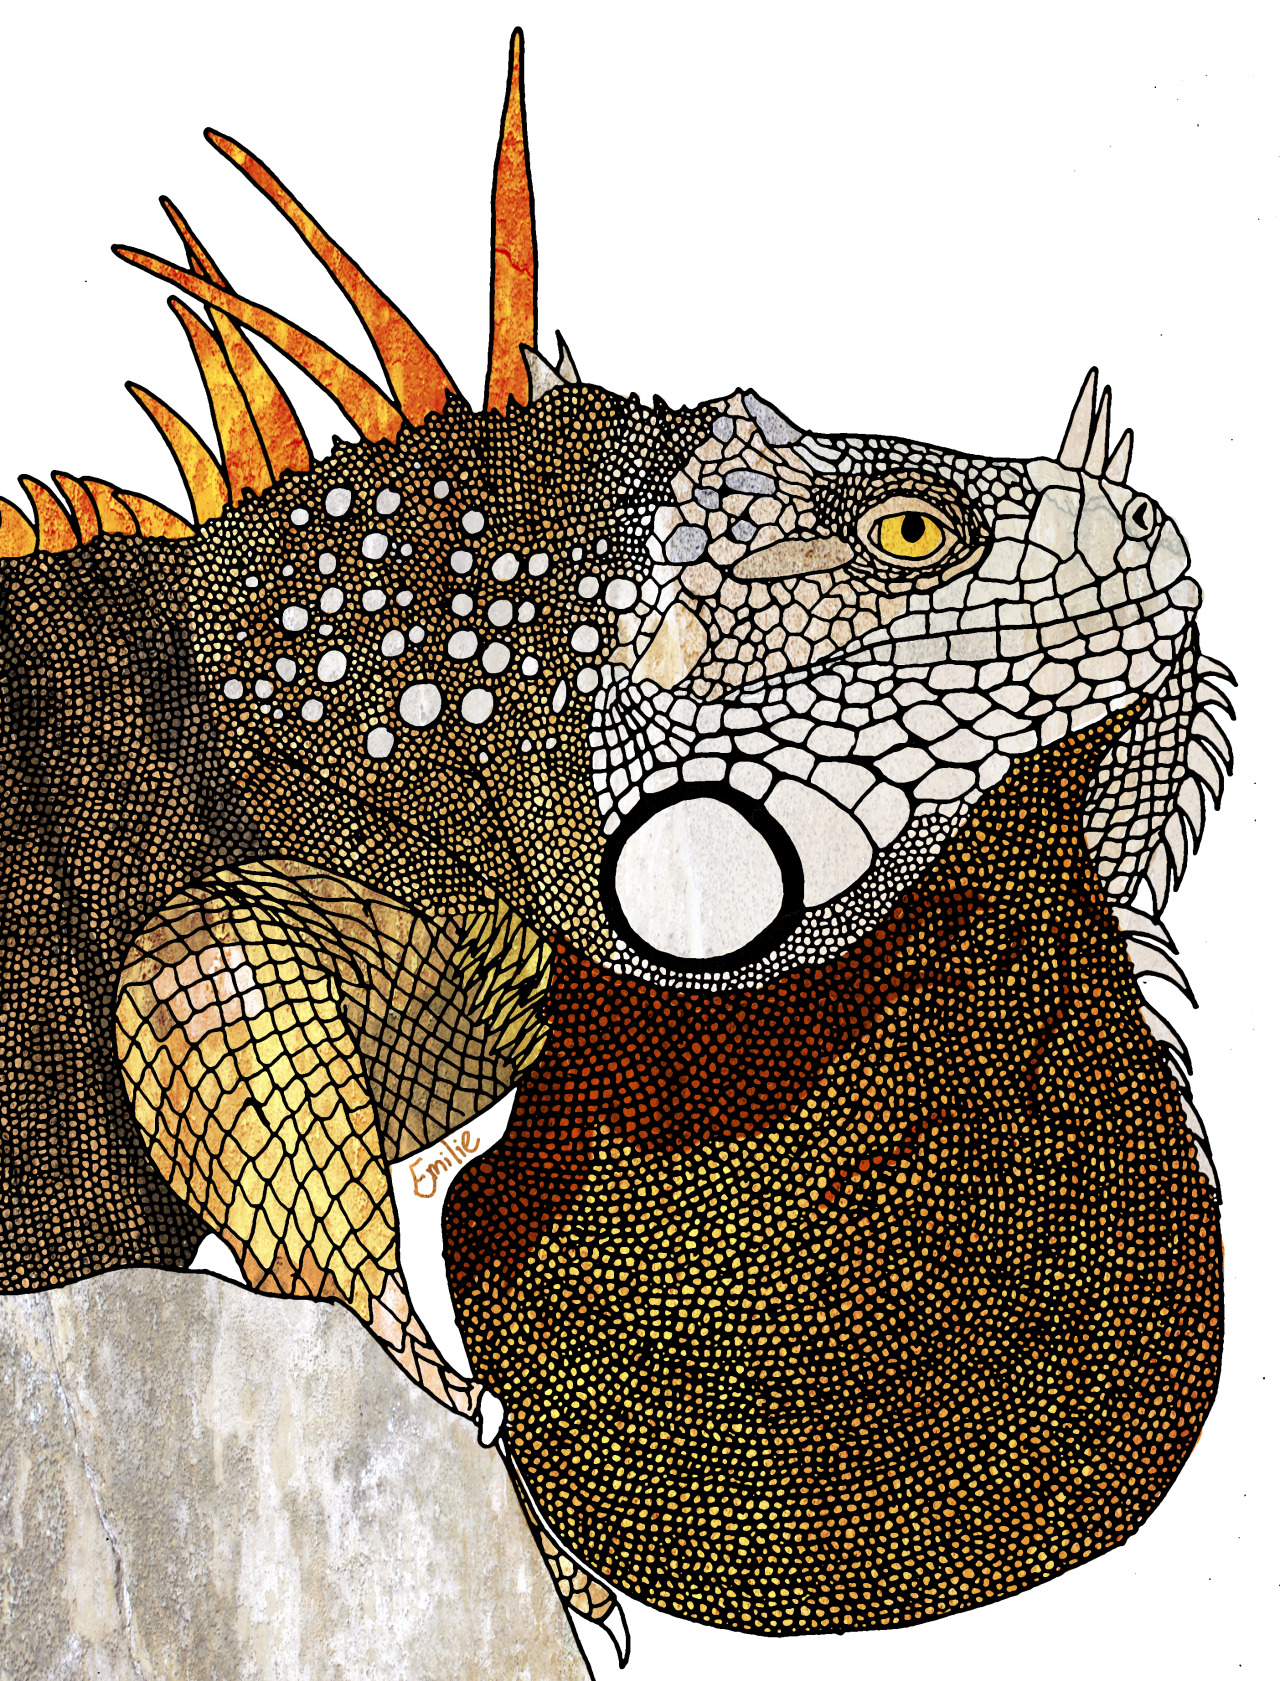 emiliegrant:
“ Green Iguana
© Emilie Grant
http://society6.com/EmilieGrant
”